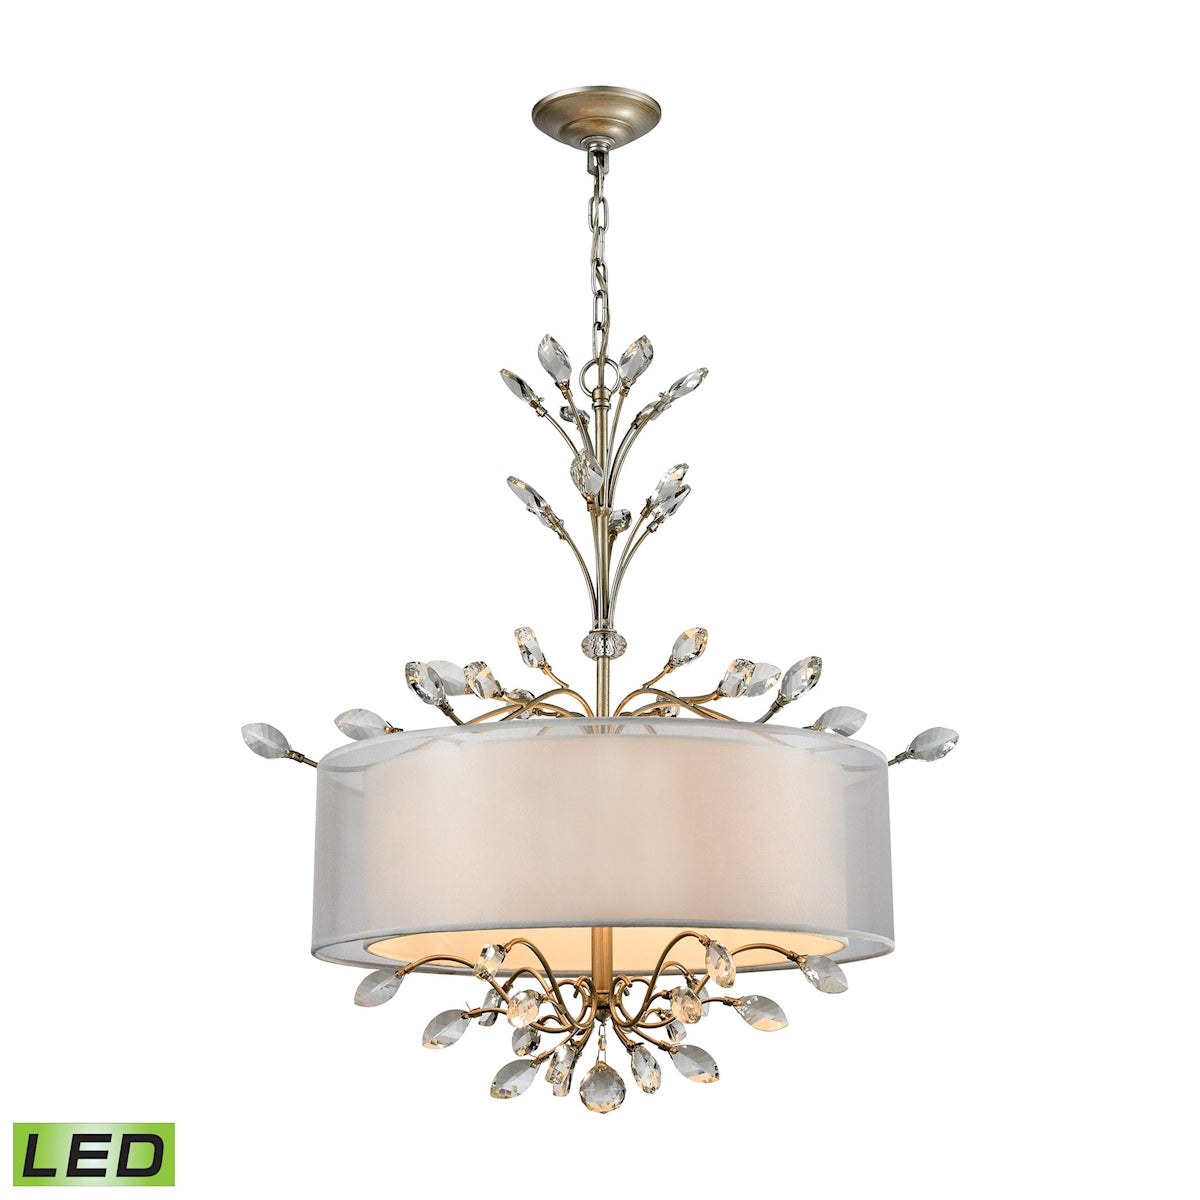 ELK Lighting 16282/4-LED Asbury 4-Light Chandelier in Aged Silver with Organza and White Fabric Shade - Includes LED Bulbs